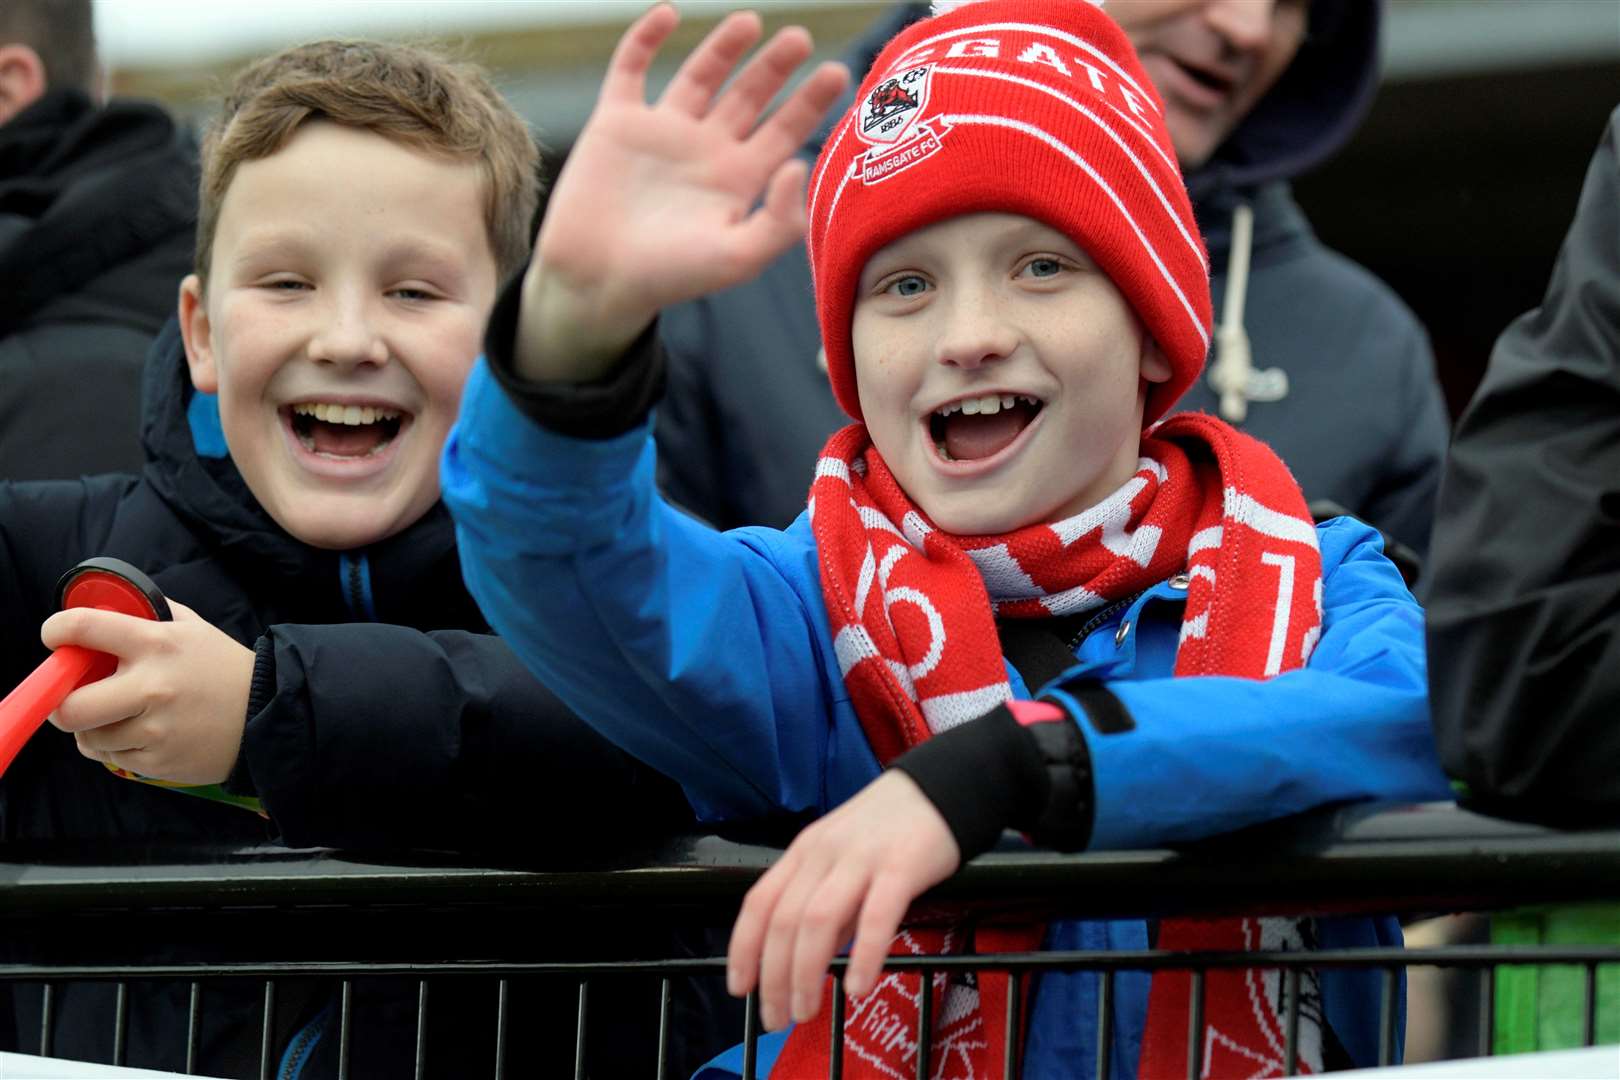 Young Ramsgate fans at Southwood on Saturday. Picture: Barry Goodwin